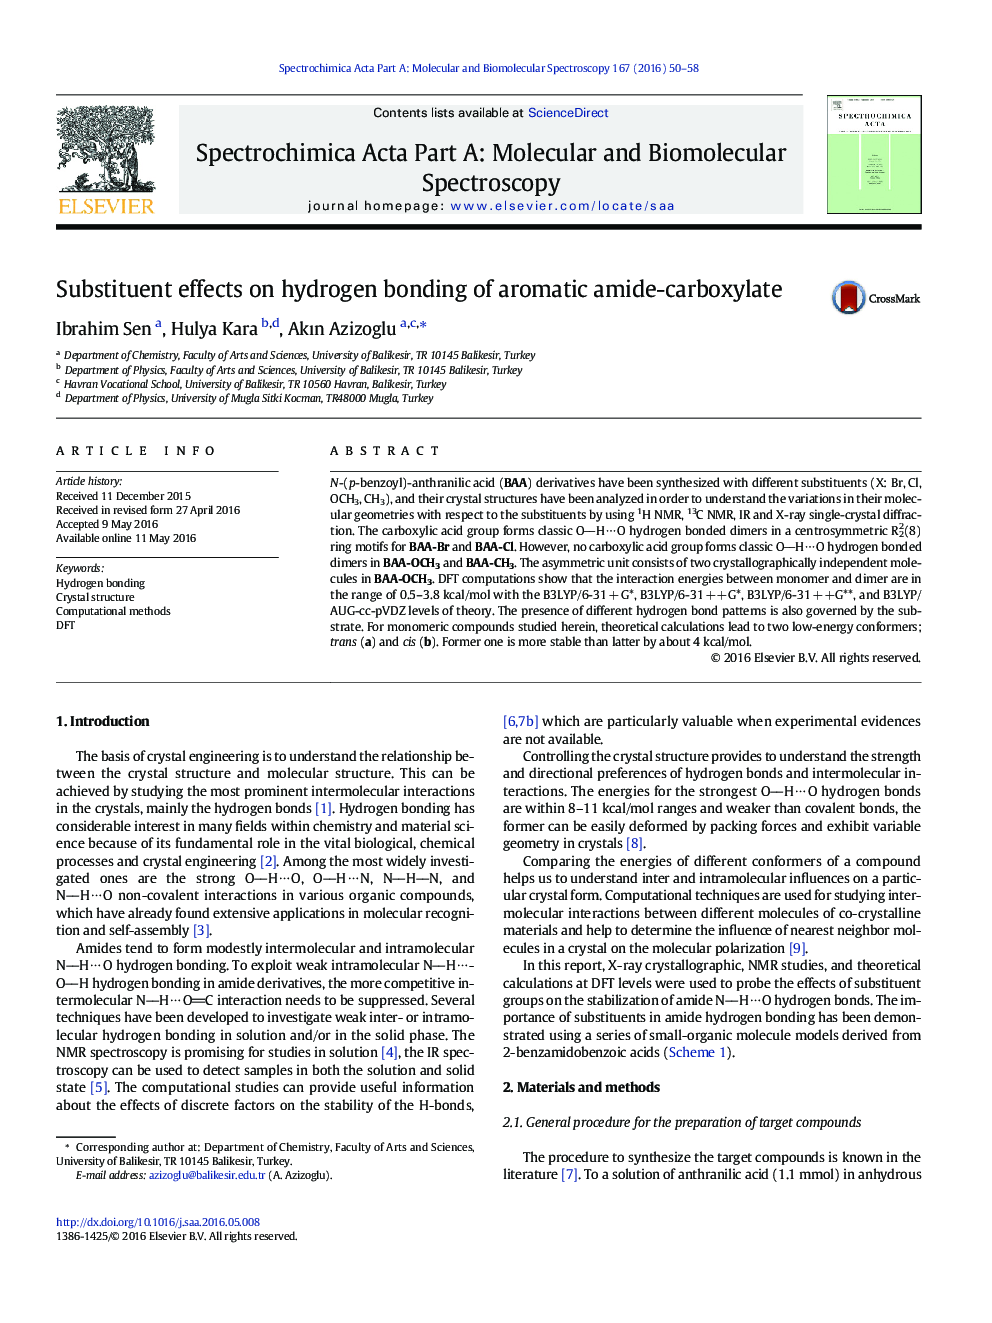 Substituent effects on hydrogen bonding of aromatic amide-carboxylate